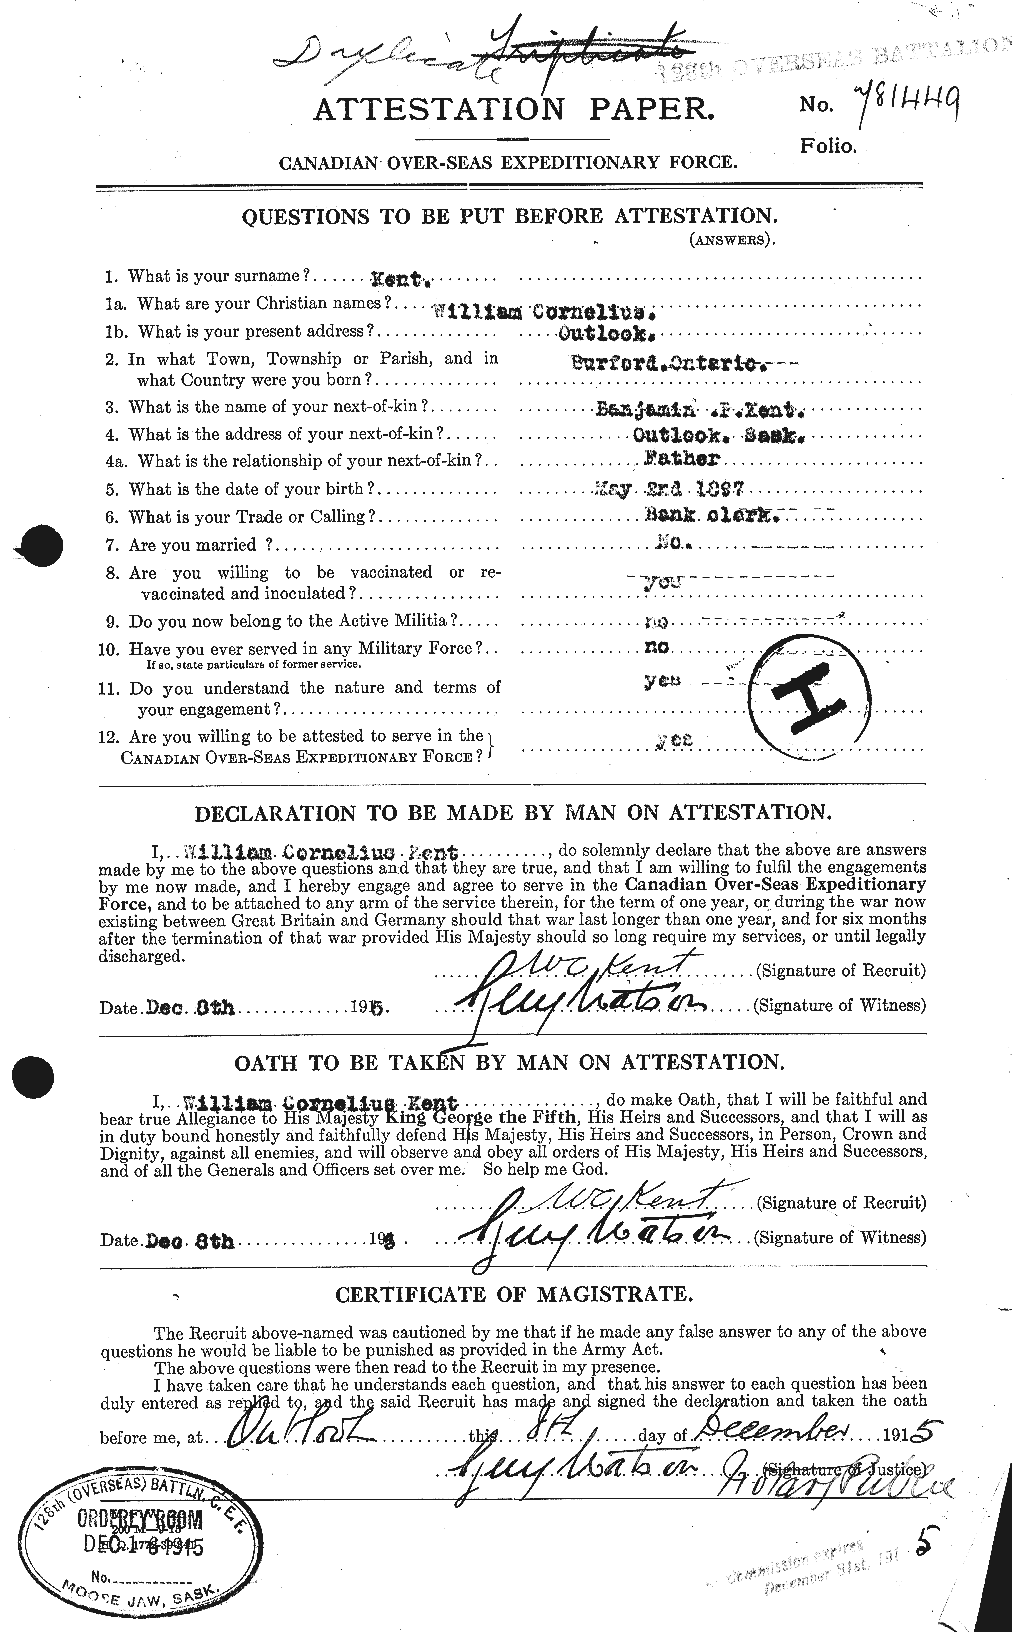 Personnel Records of the First World War - CEF 429575a